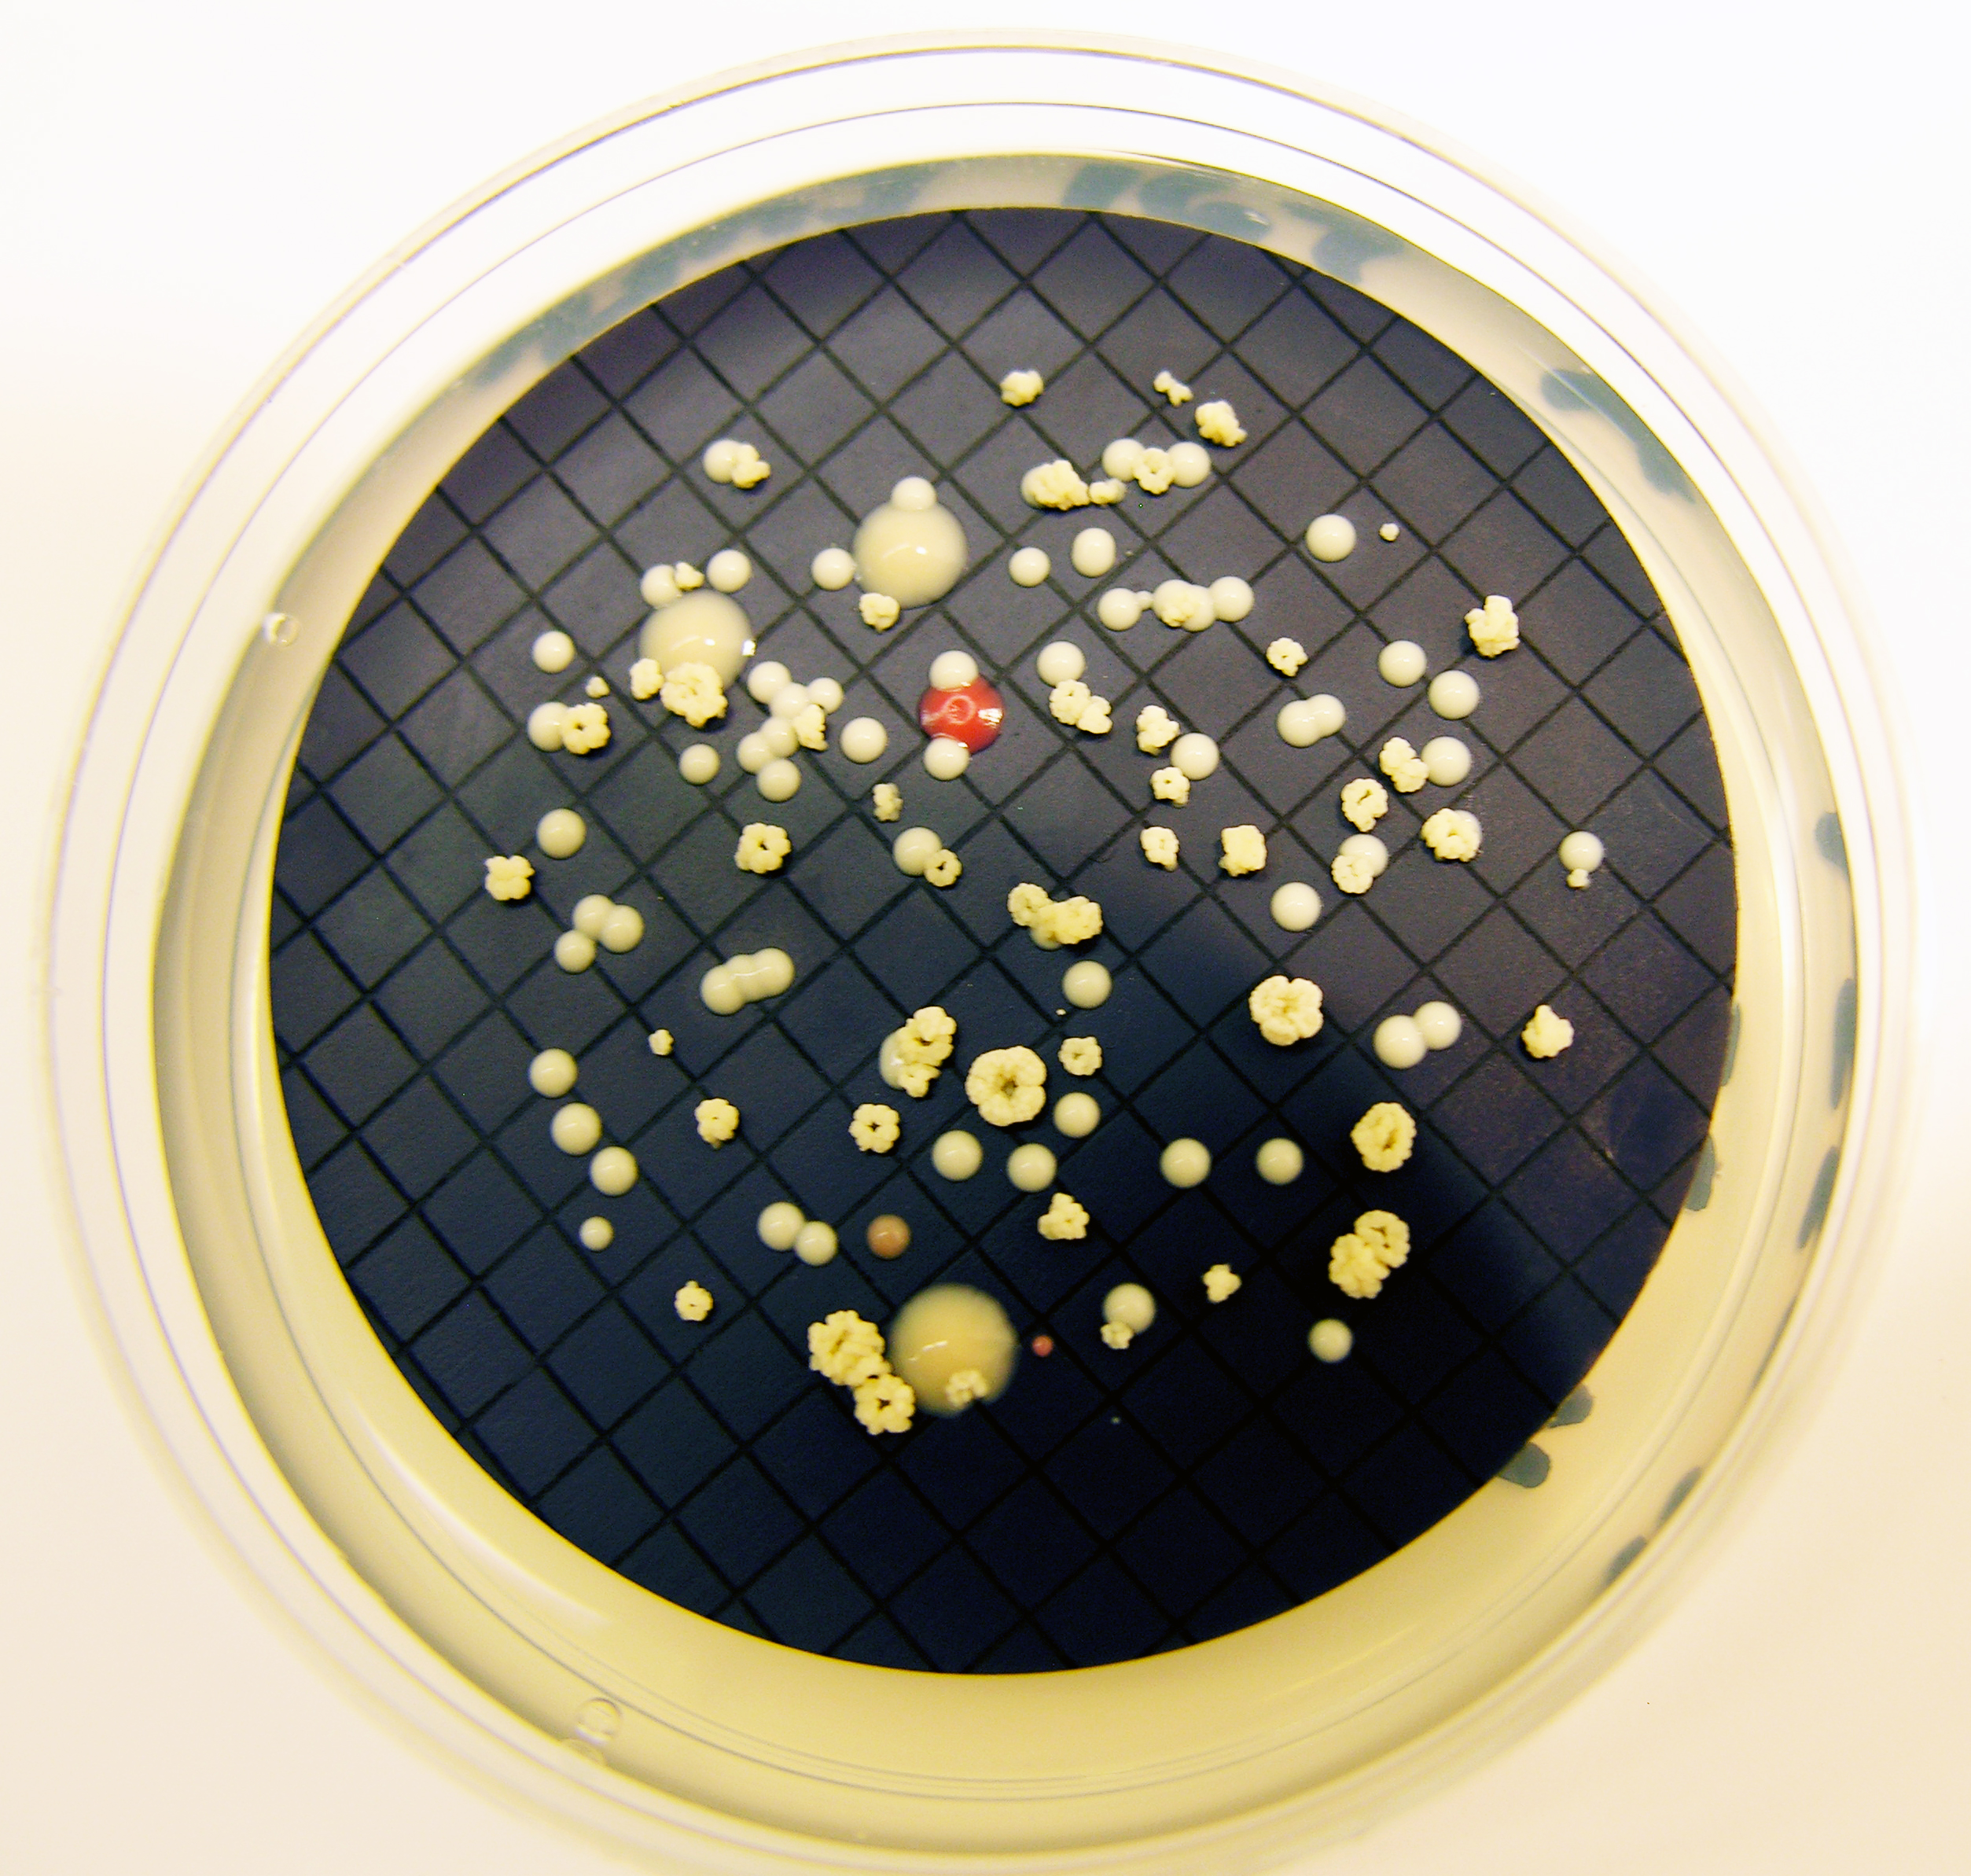 Image shows the growth of Mycobacterium isolated on a plate of culture medium. (Credit: Stacey Pfaller, EPA)